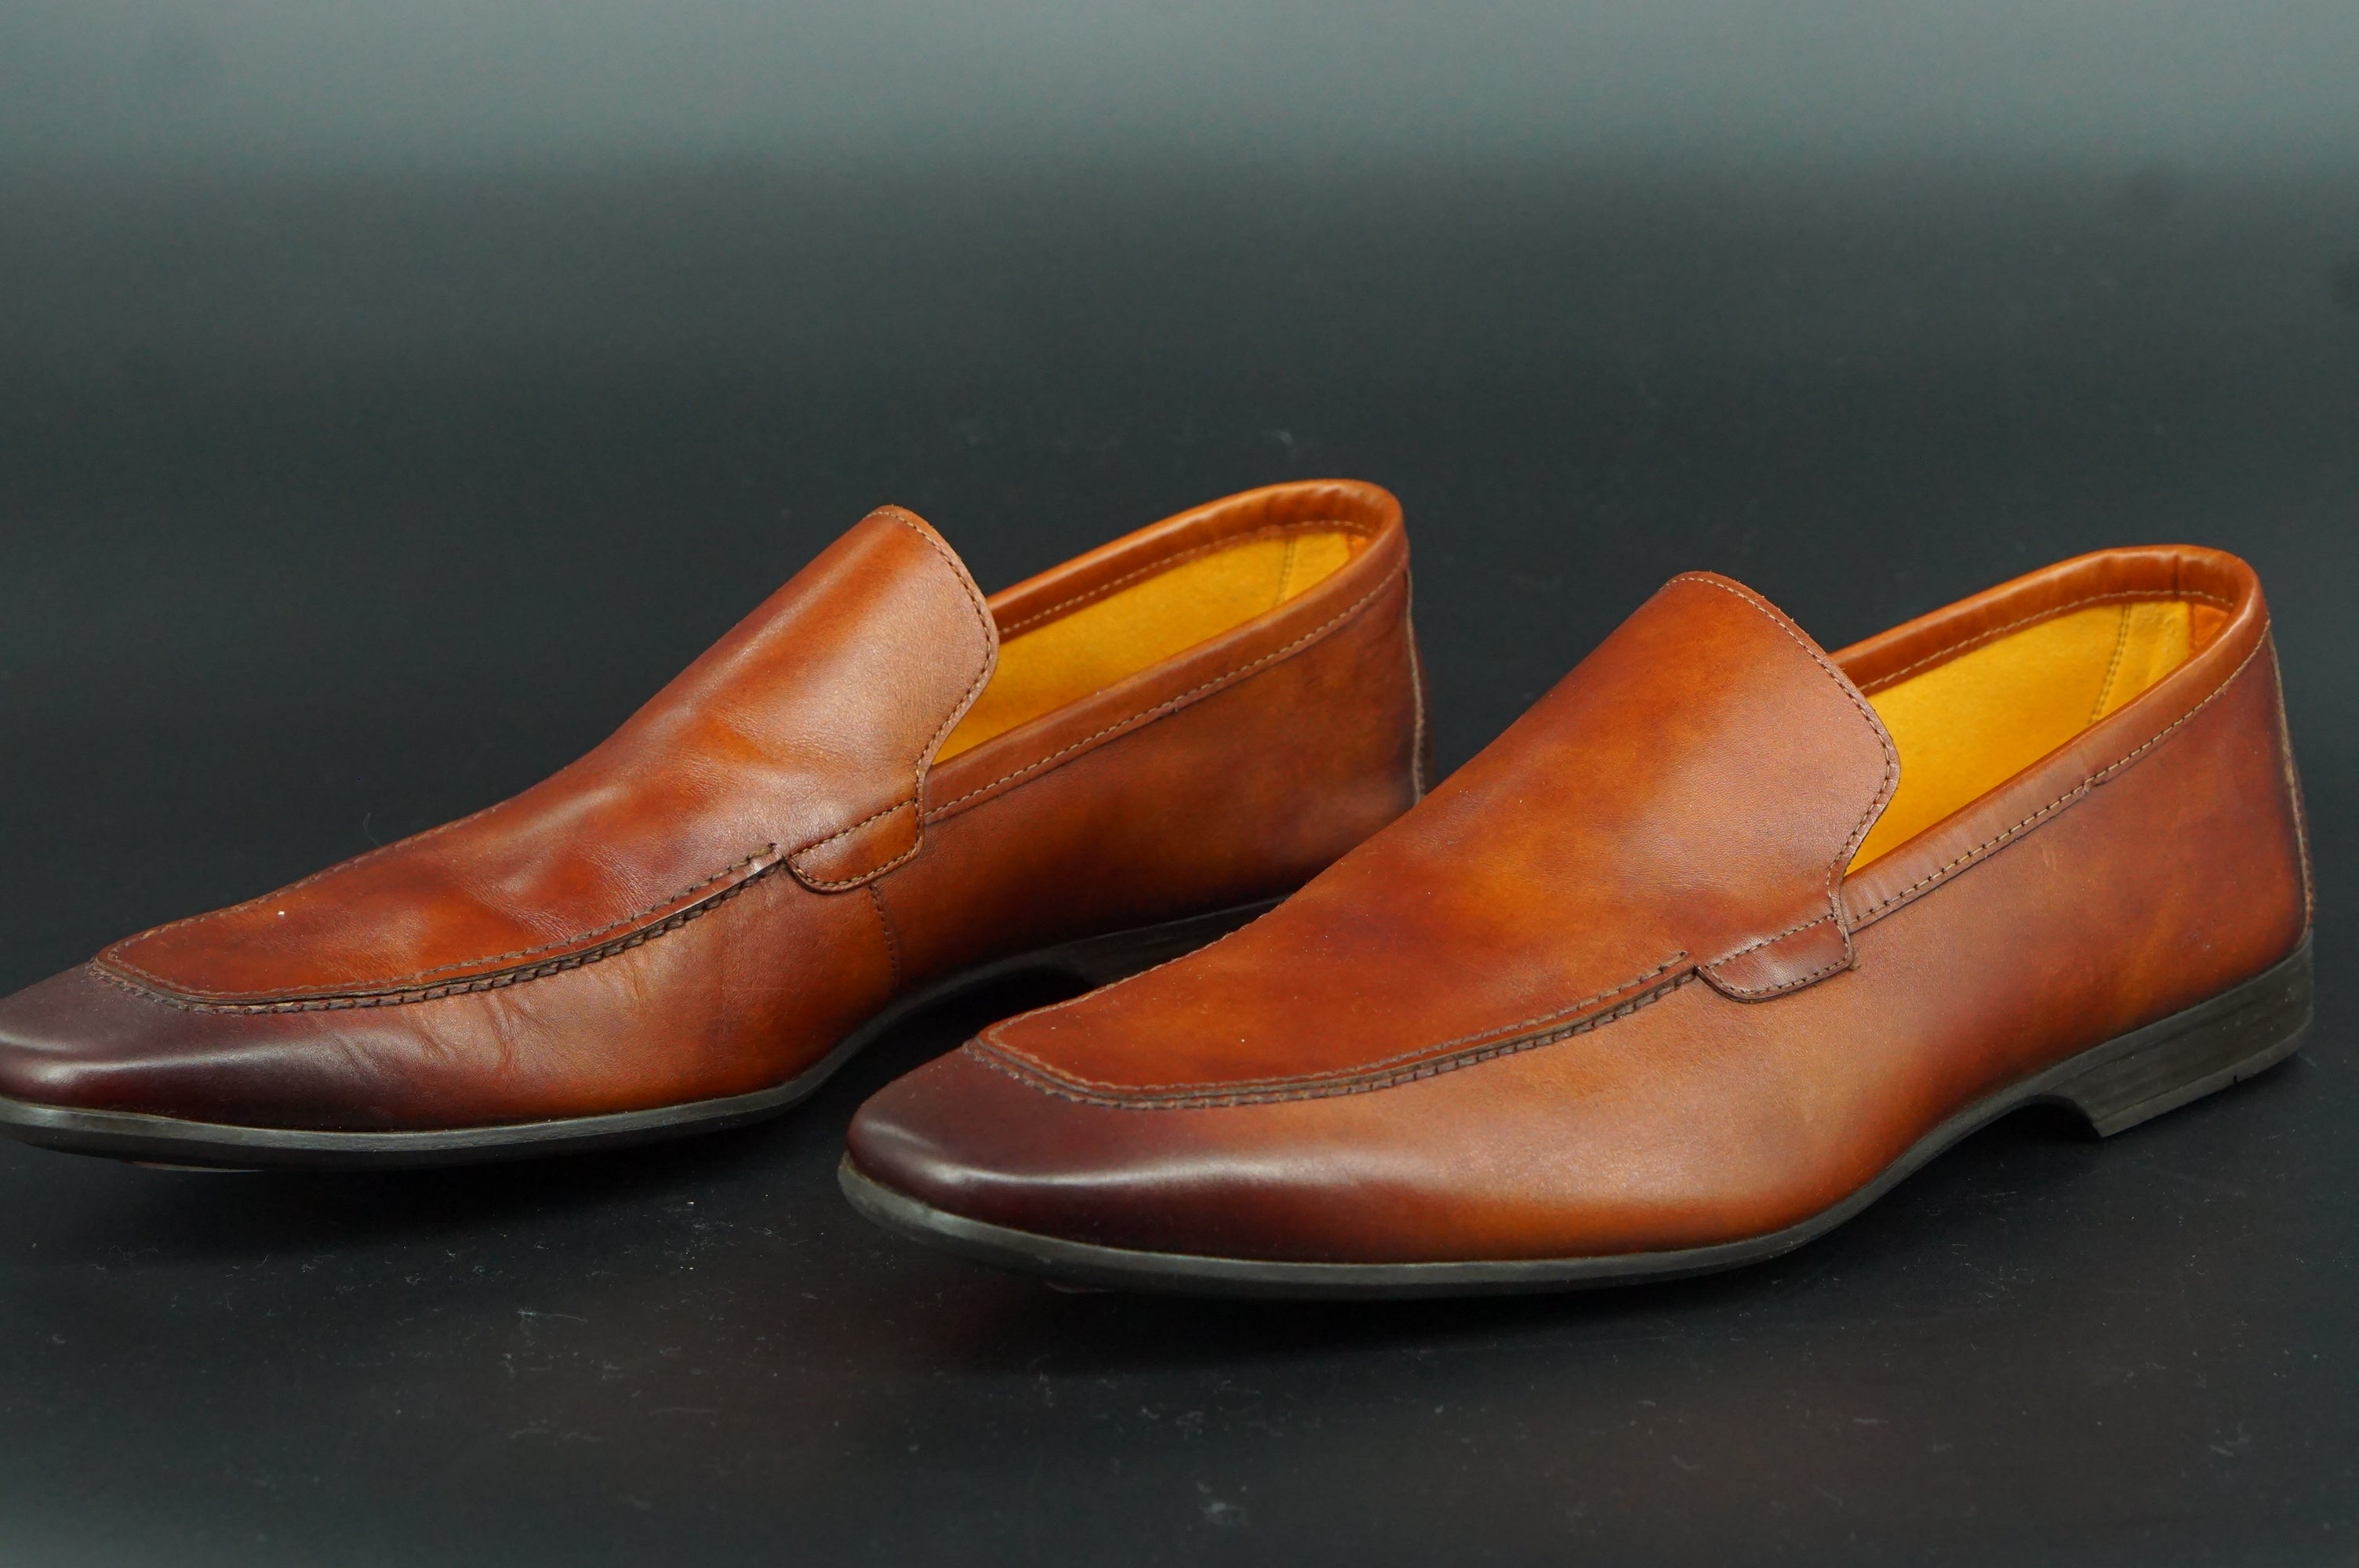 Magnanni Sato Smooth Loafers SZ 12 Cognac brown Leather Apron toe $350